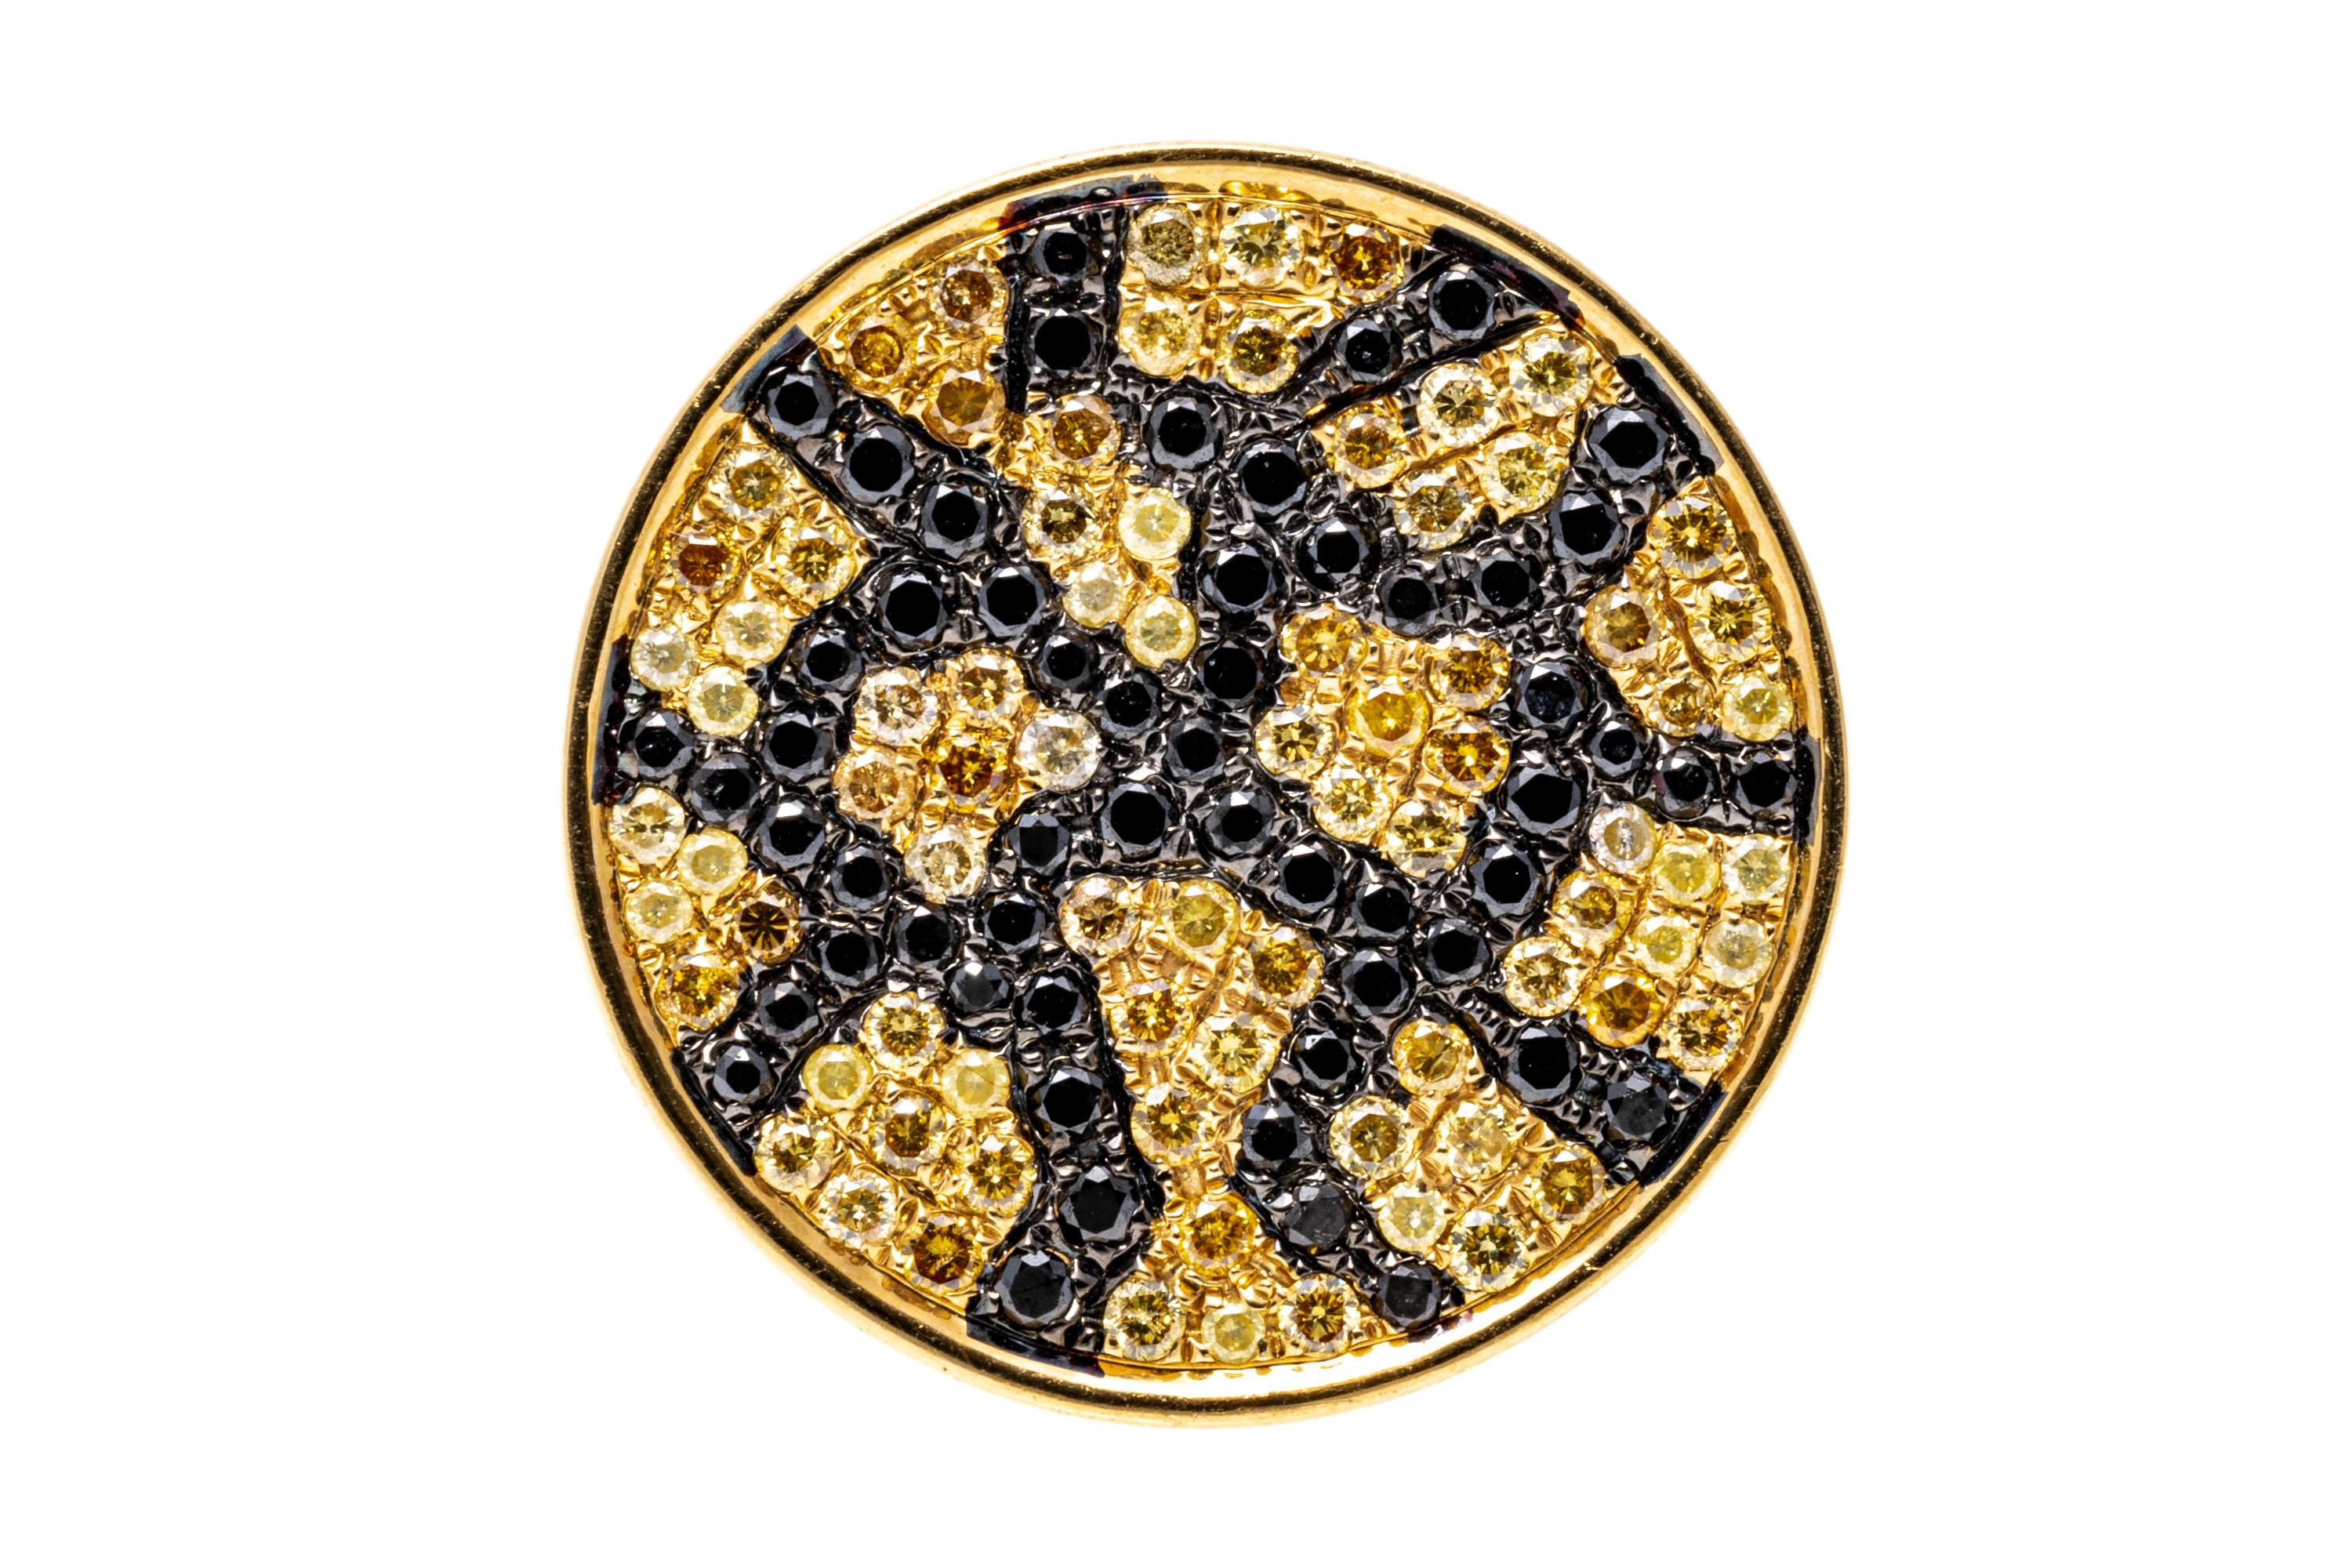 18k yellow gold ring. This stunning ring is a round, pave diamond set top, set with a field of pale and dark yellow diamonds, punctuated with round black faceted diamonds to give a leopard print pattern. The diamond weight for the ring is 1.13